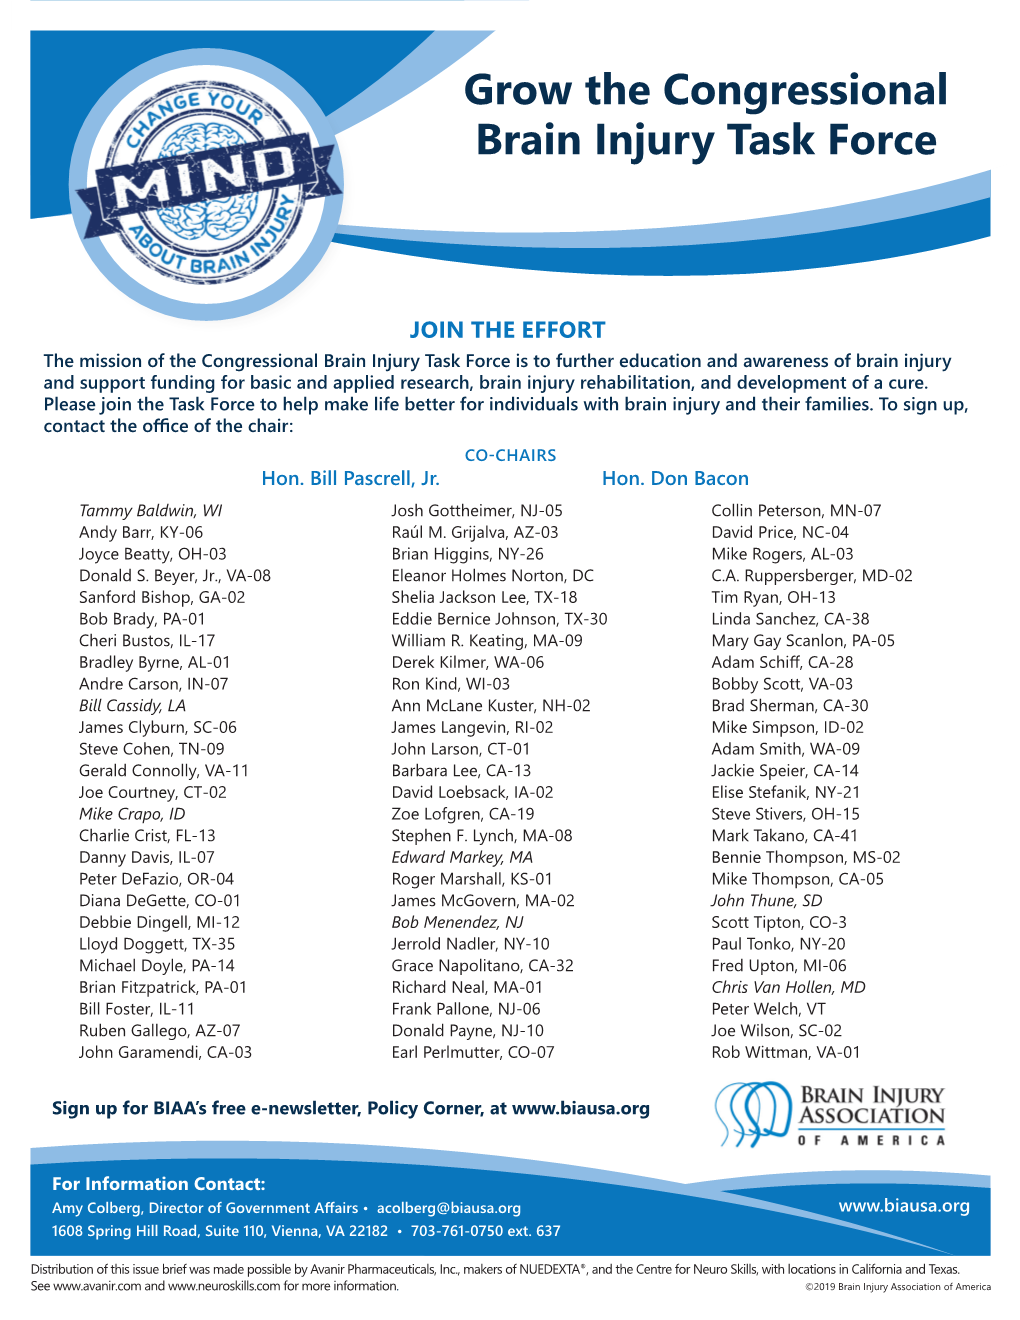 Grow the Congressional Brain Injury Task Force